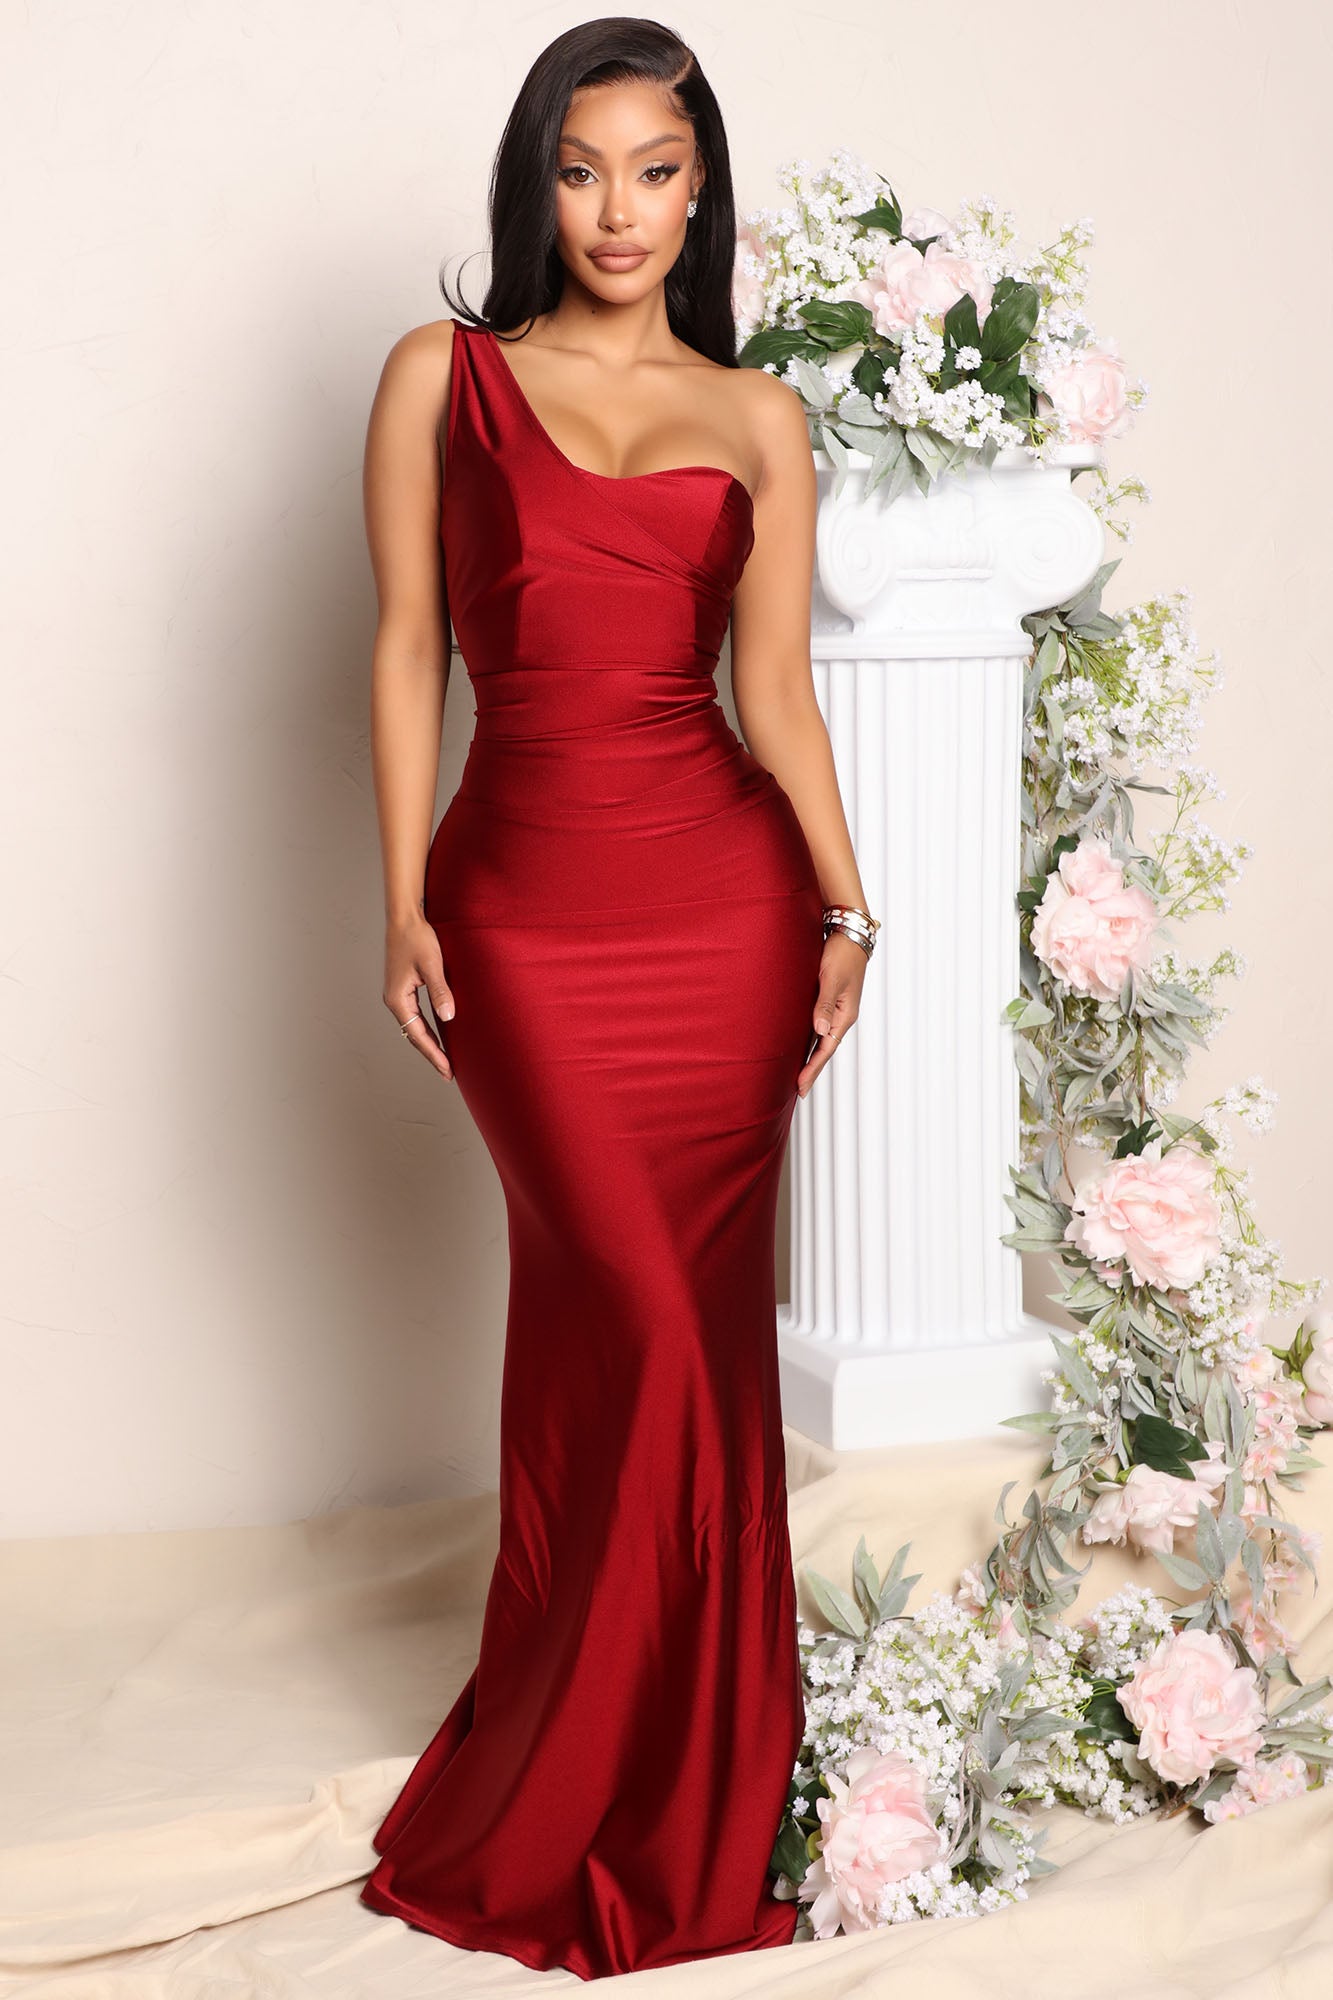 Erotic red color dress